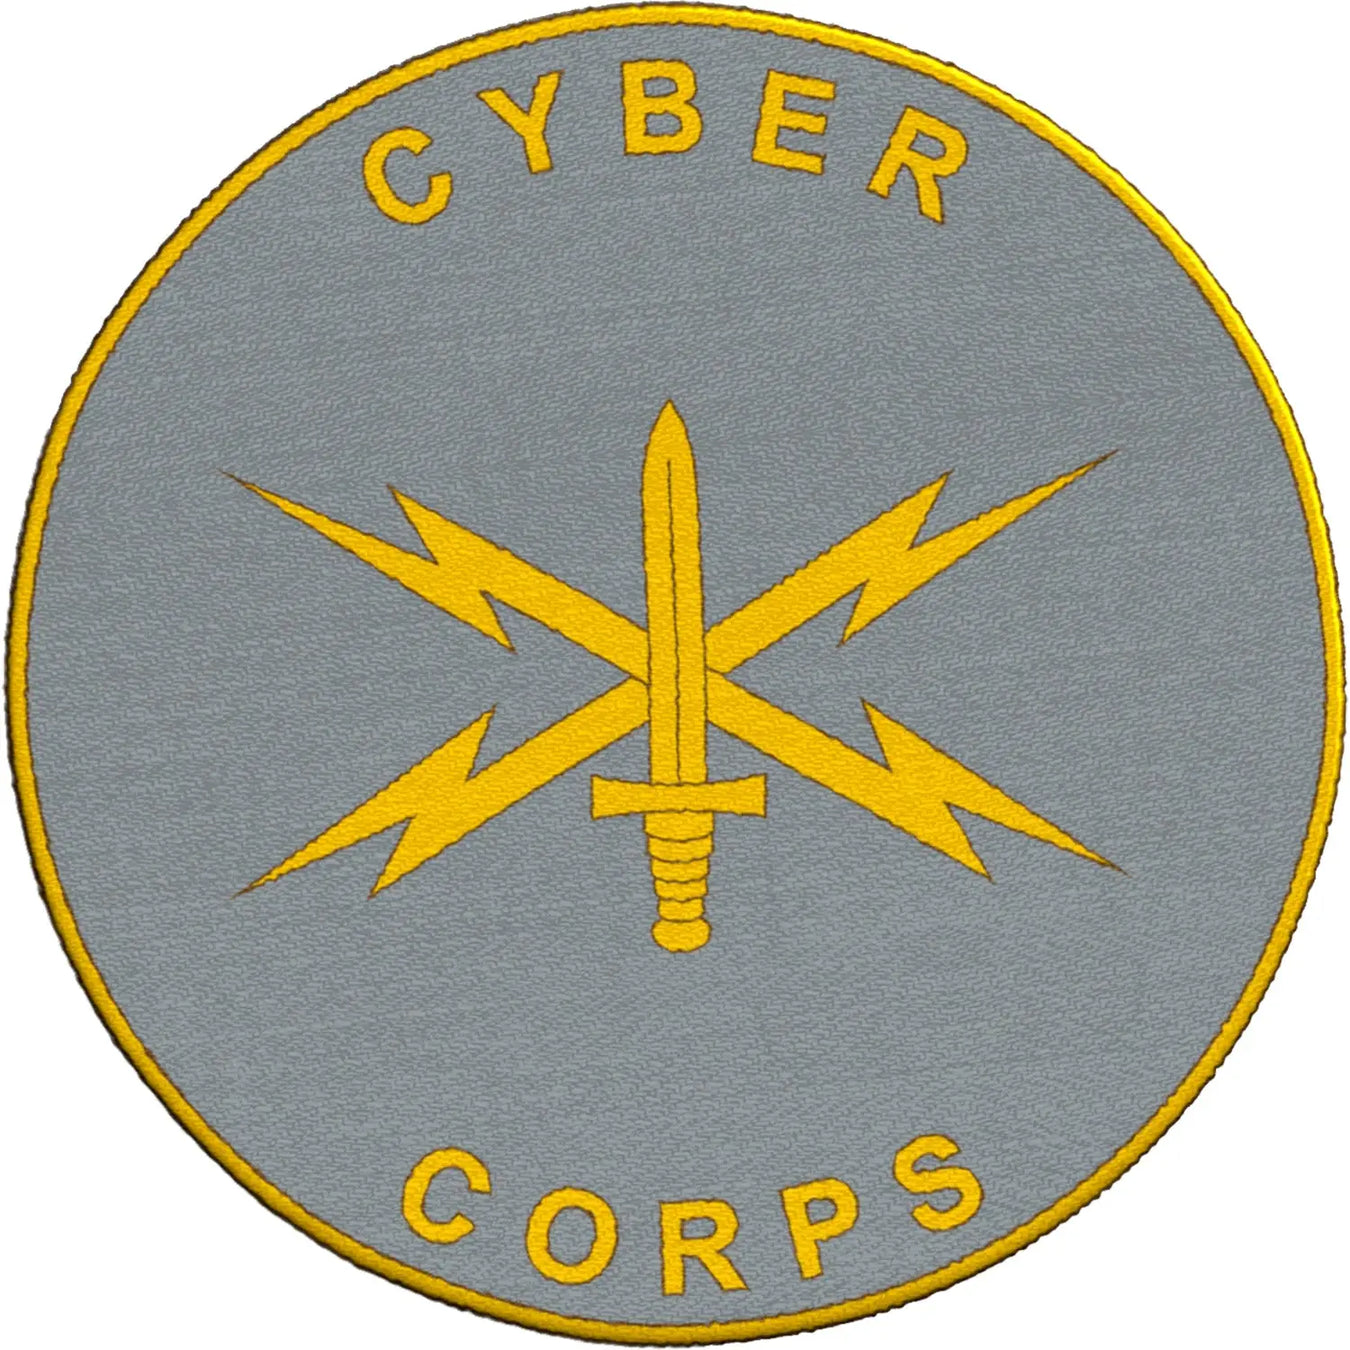 U.S. Army Cyber Corps Patches